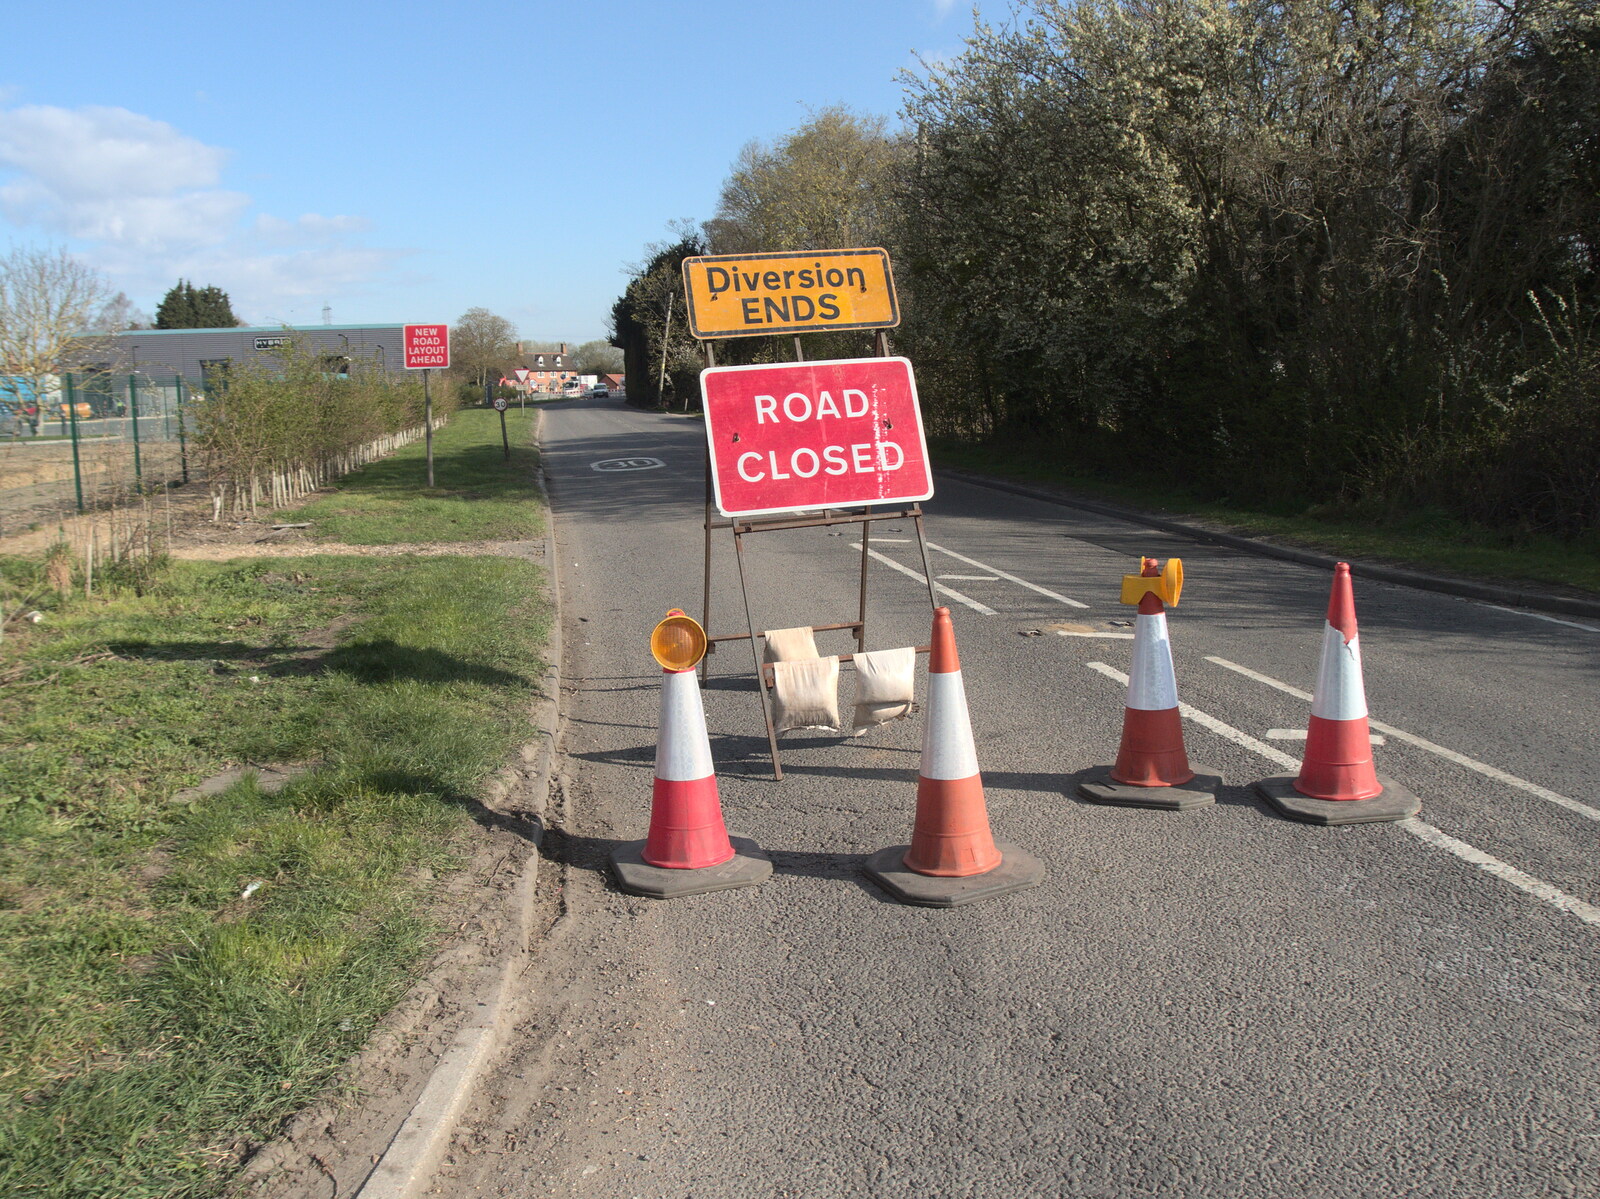 The old B1077 to the Swan is closed from Roadworks and Harry's Trampoline, Brome, Suffolk - 6th April 2021